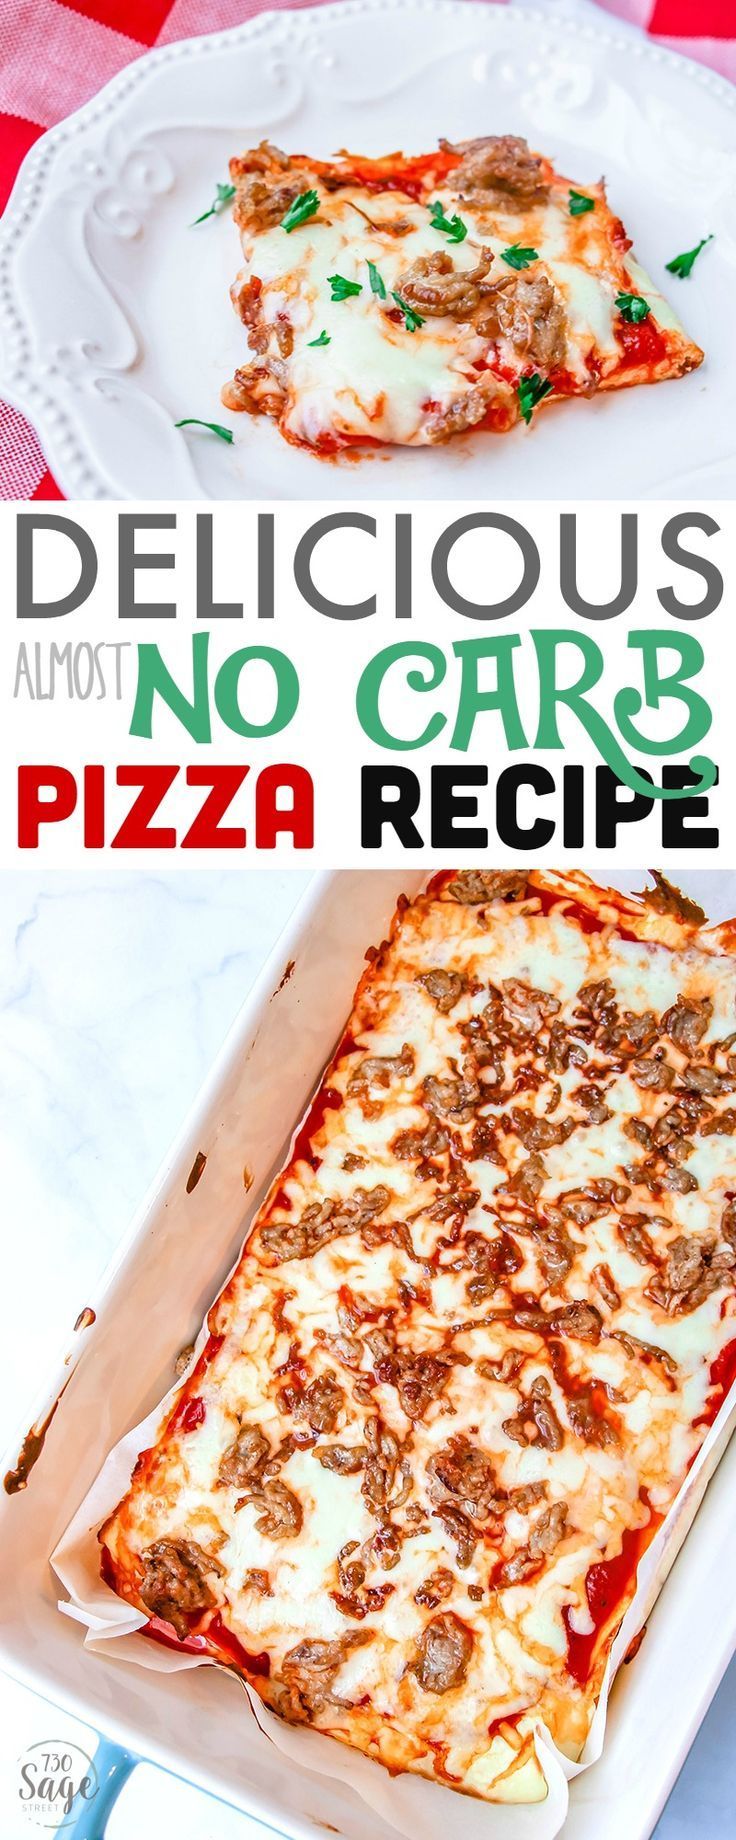 This almost no carb pizza is perfect for diet plans such as Atkins, low carb or ketogenic diets & anyone looking to reduce their